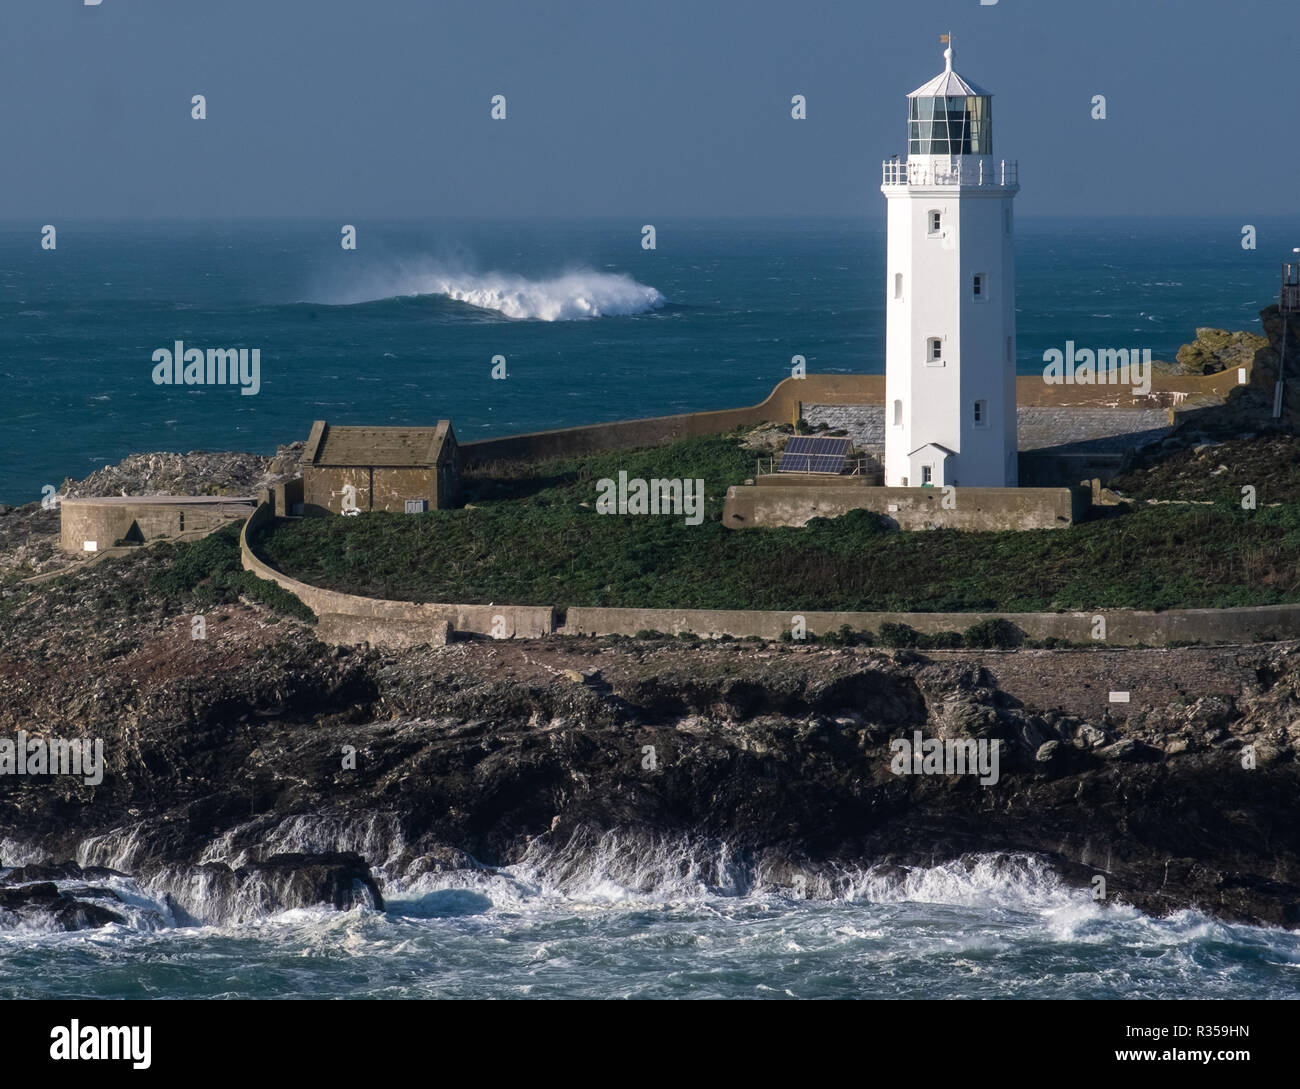 Close up view of Godrevy lighthouse, part of the island and the little old dwellings to the side. Breaking wave in the sea behind. Stock Photo